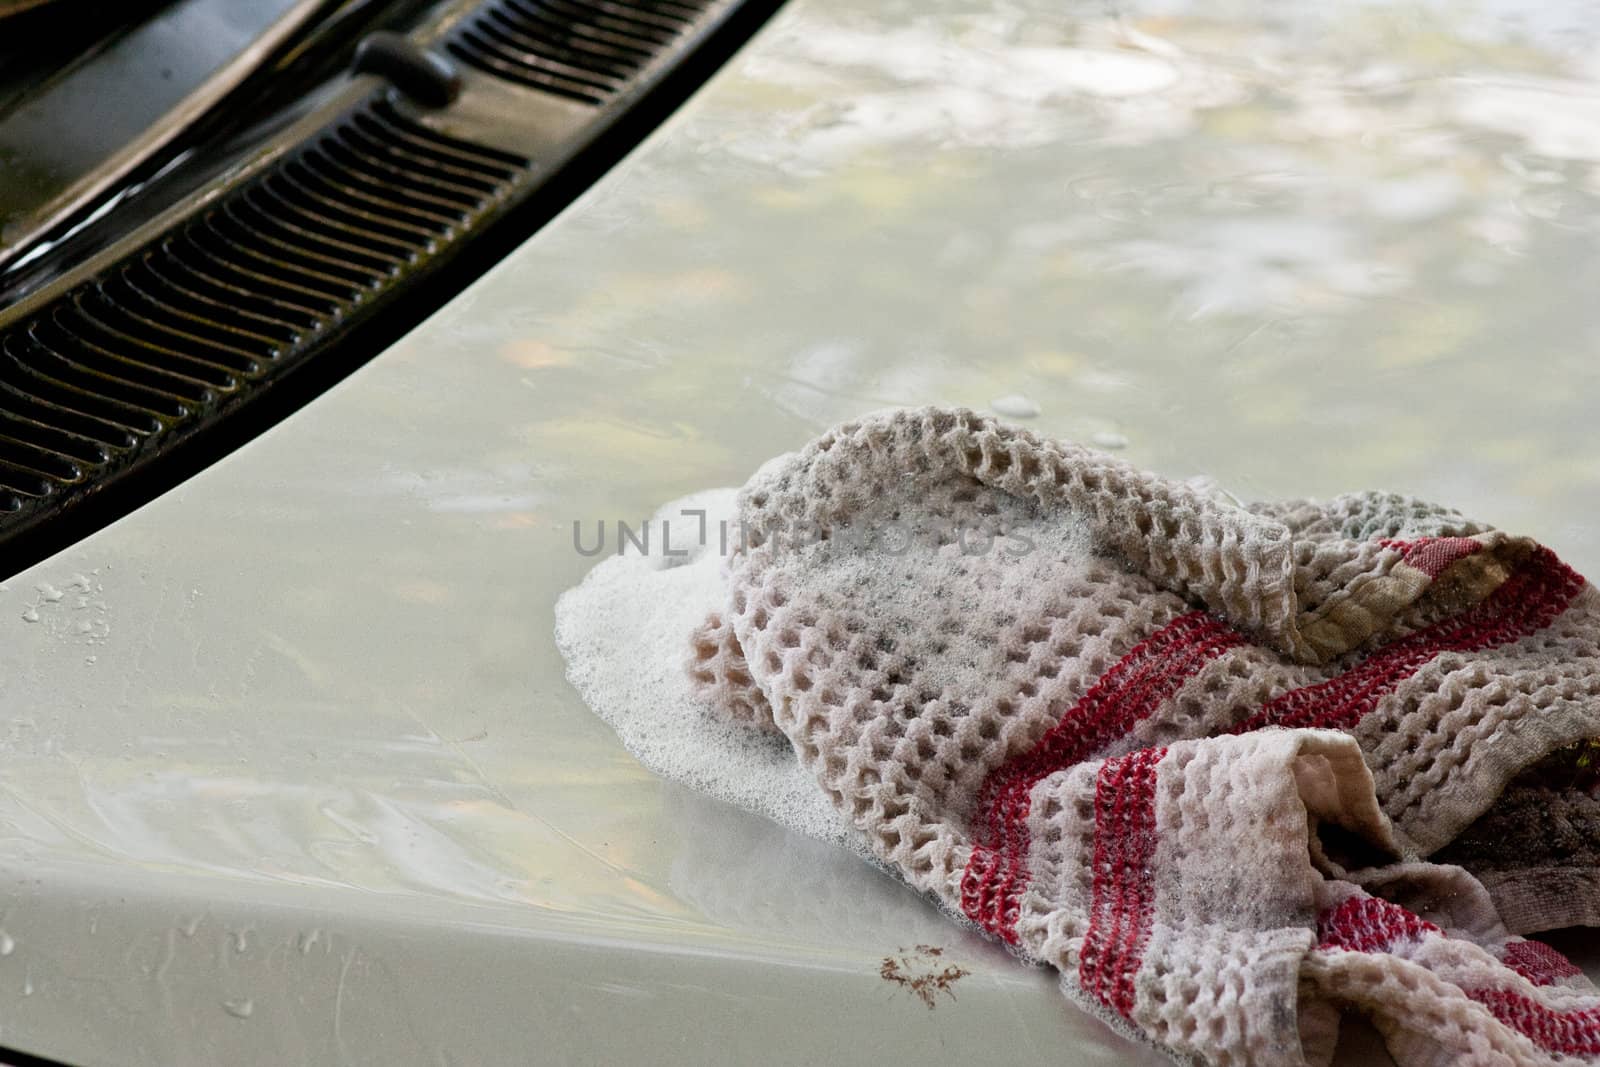 Washing the hood of a car with a cloth and soapy water.